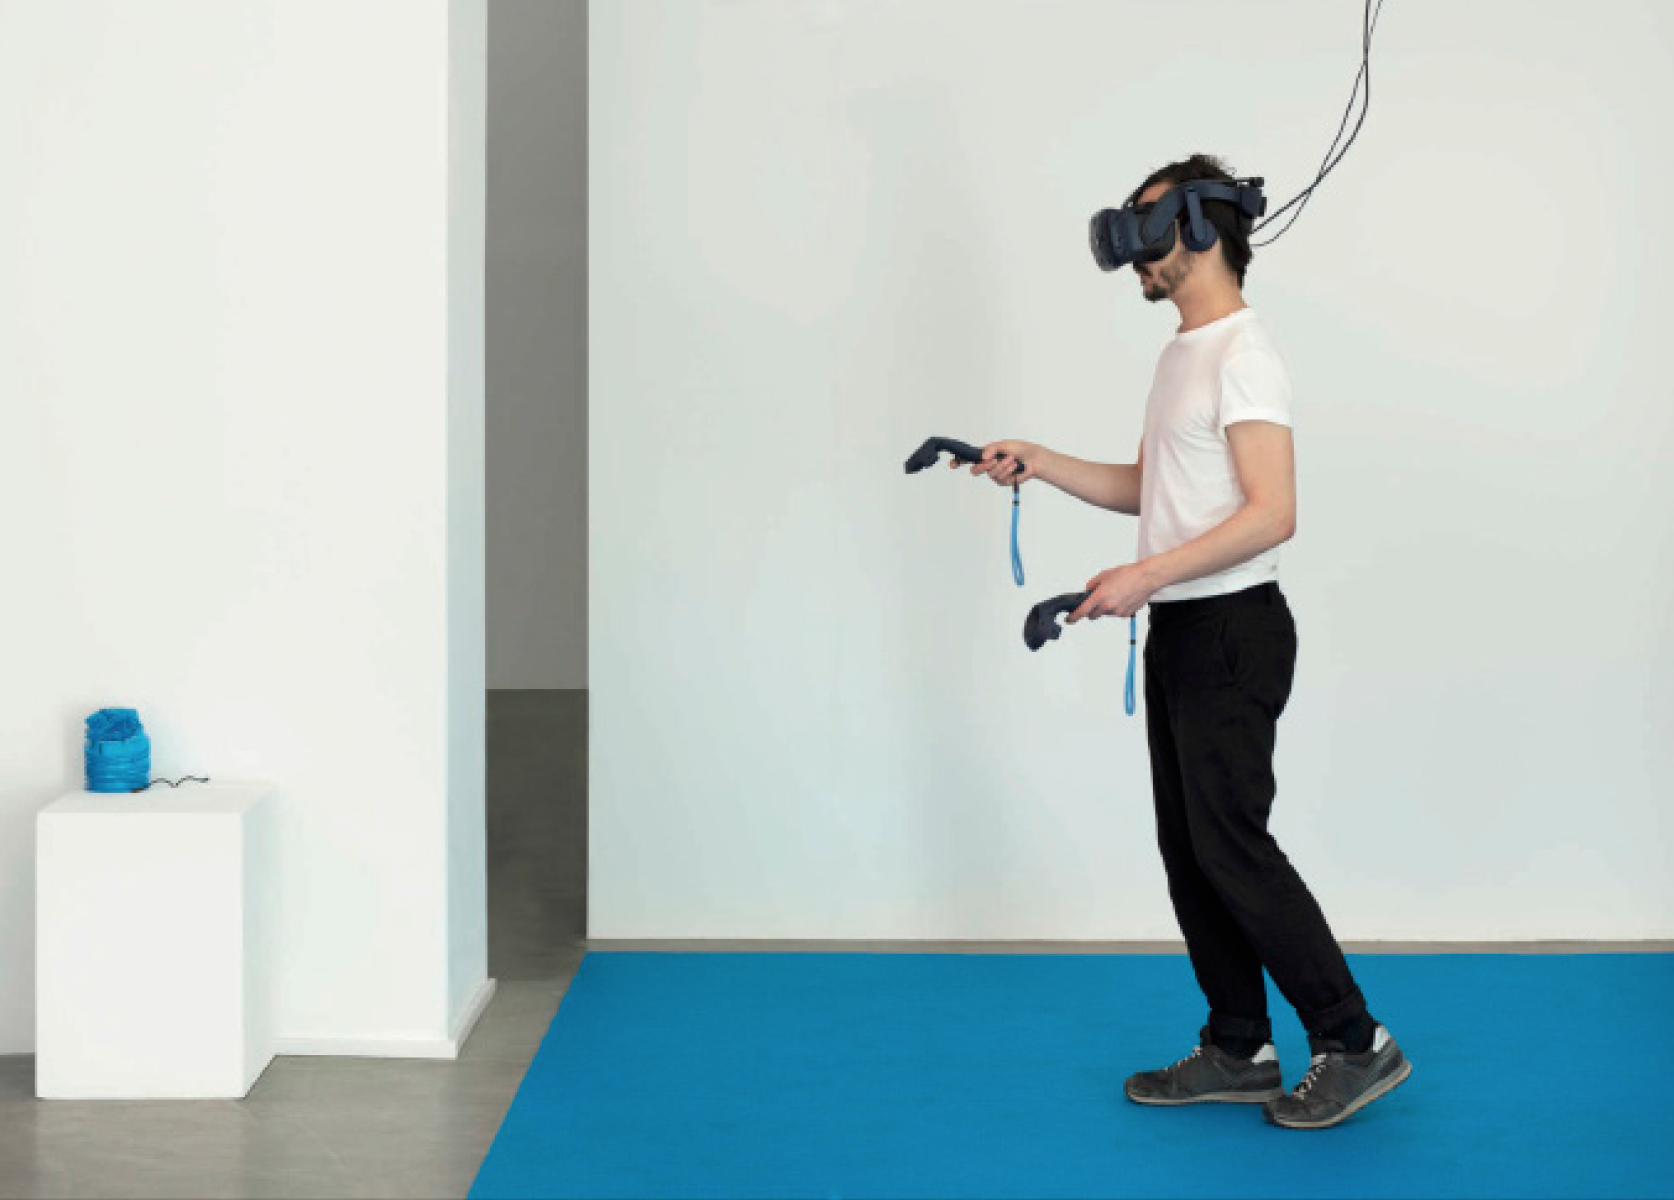 This is a person using virtual reality headset featuring work by the artist Doireann O'malley